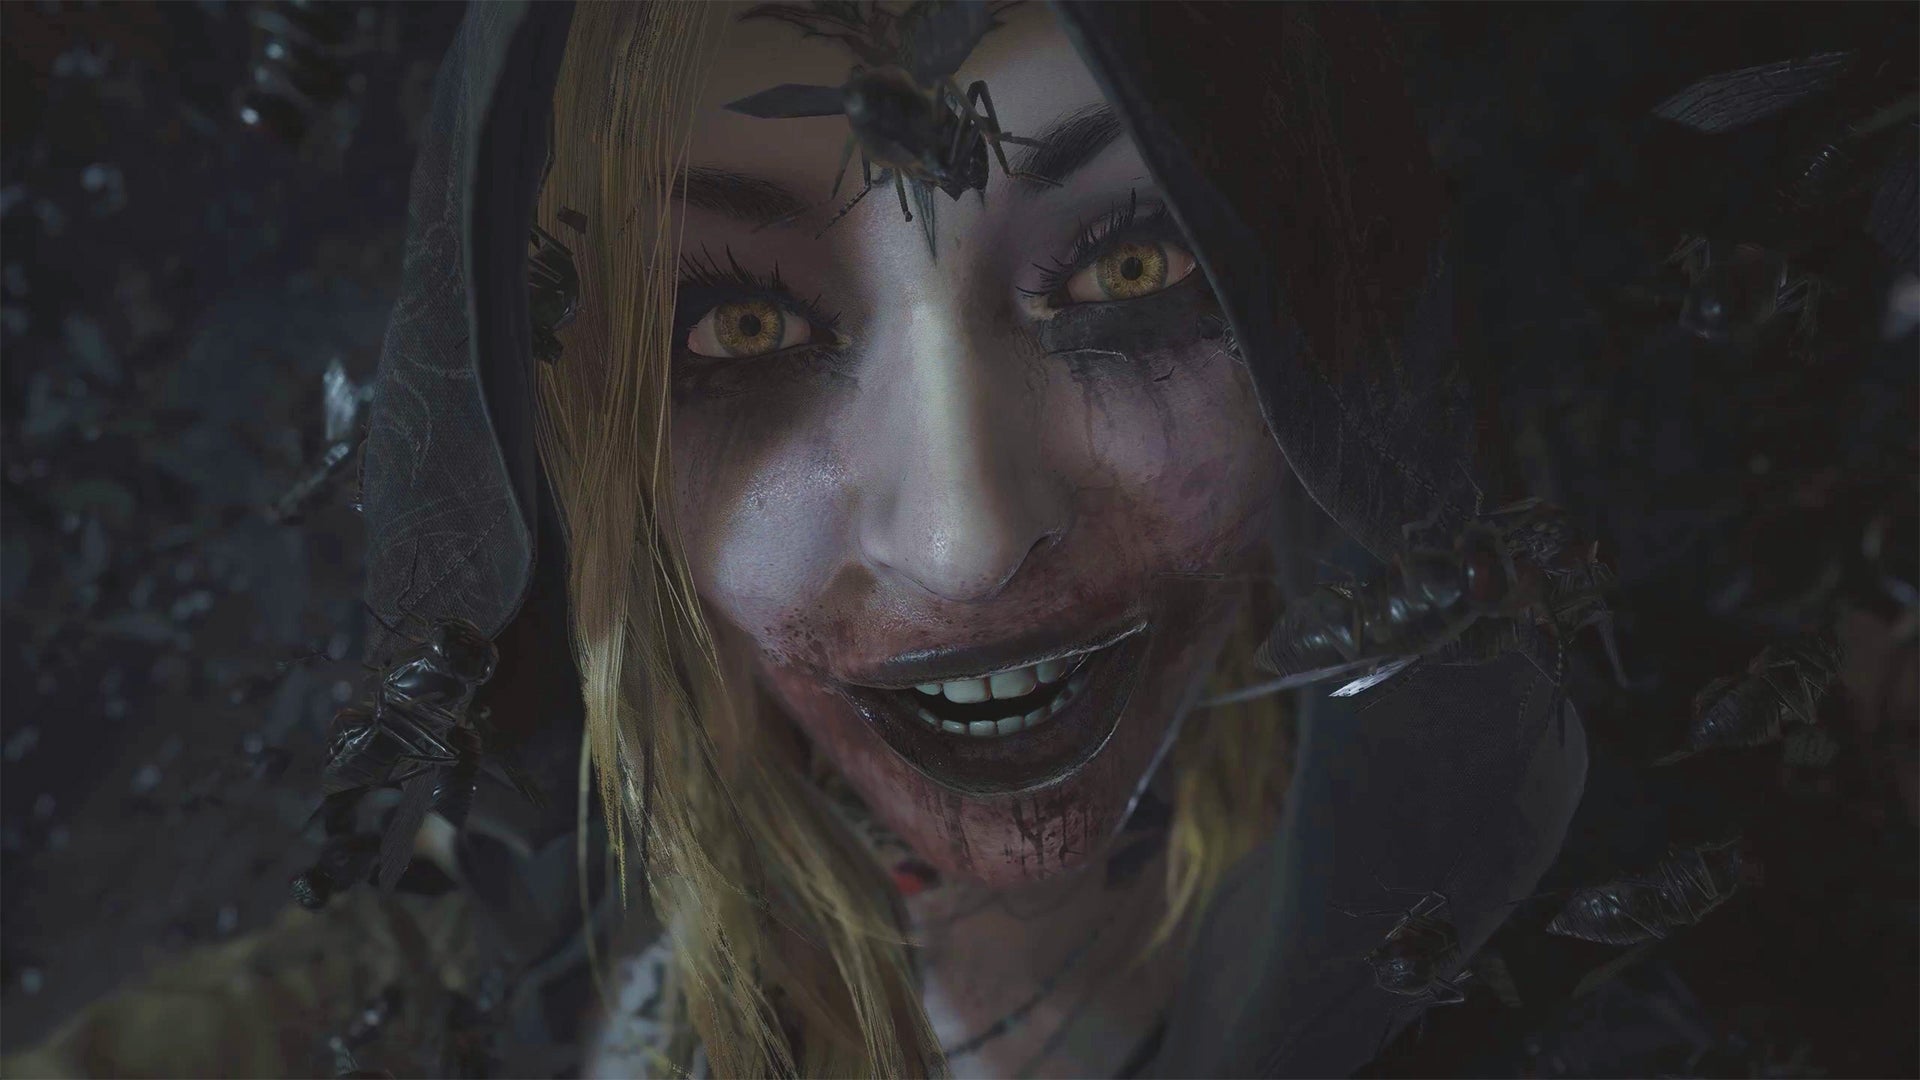 A close-up of one of Lady Dimitrescu's daughters from Resident Evil Village, with bugs flying all around her